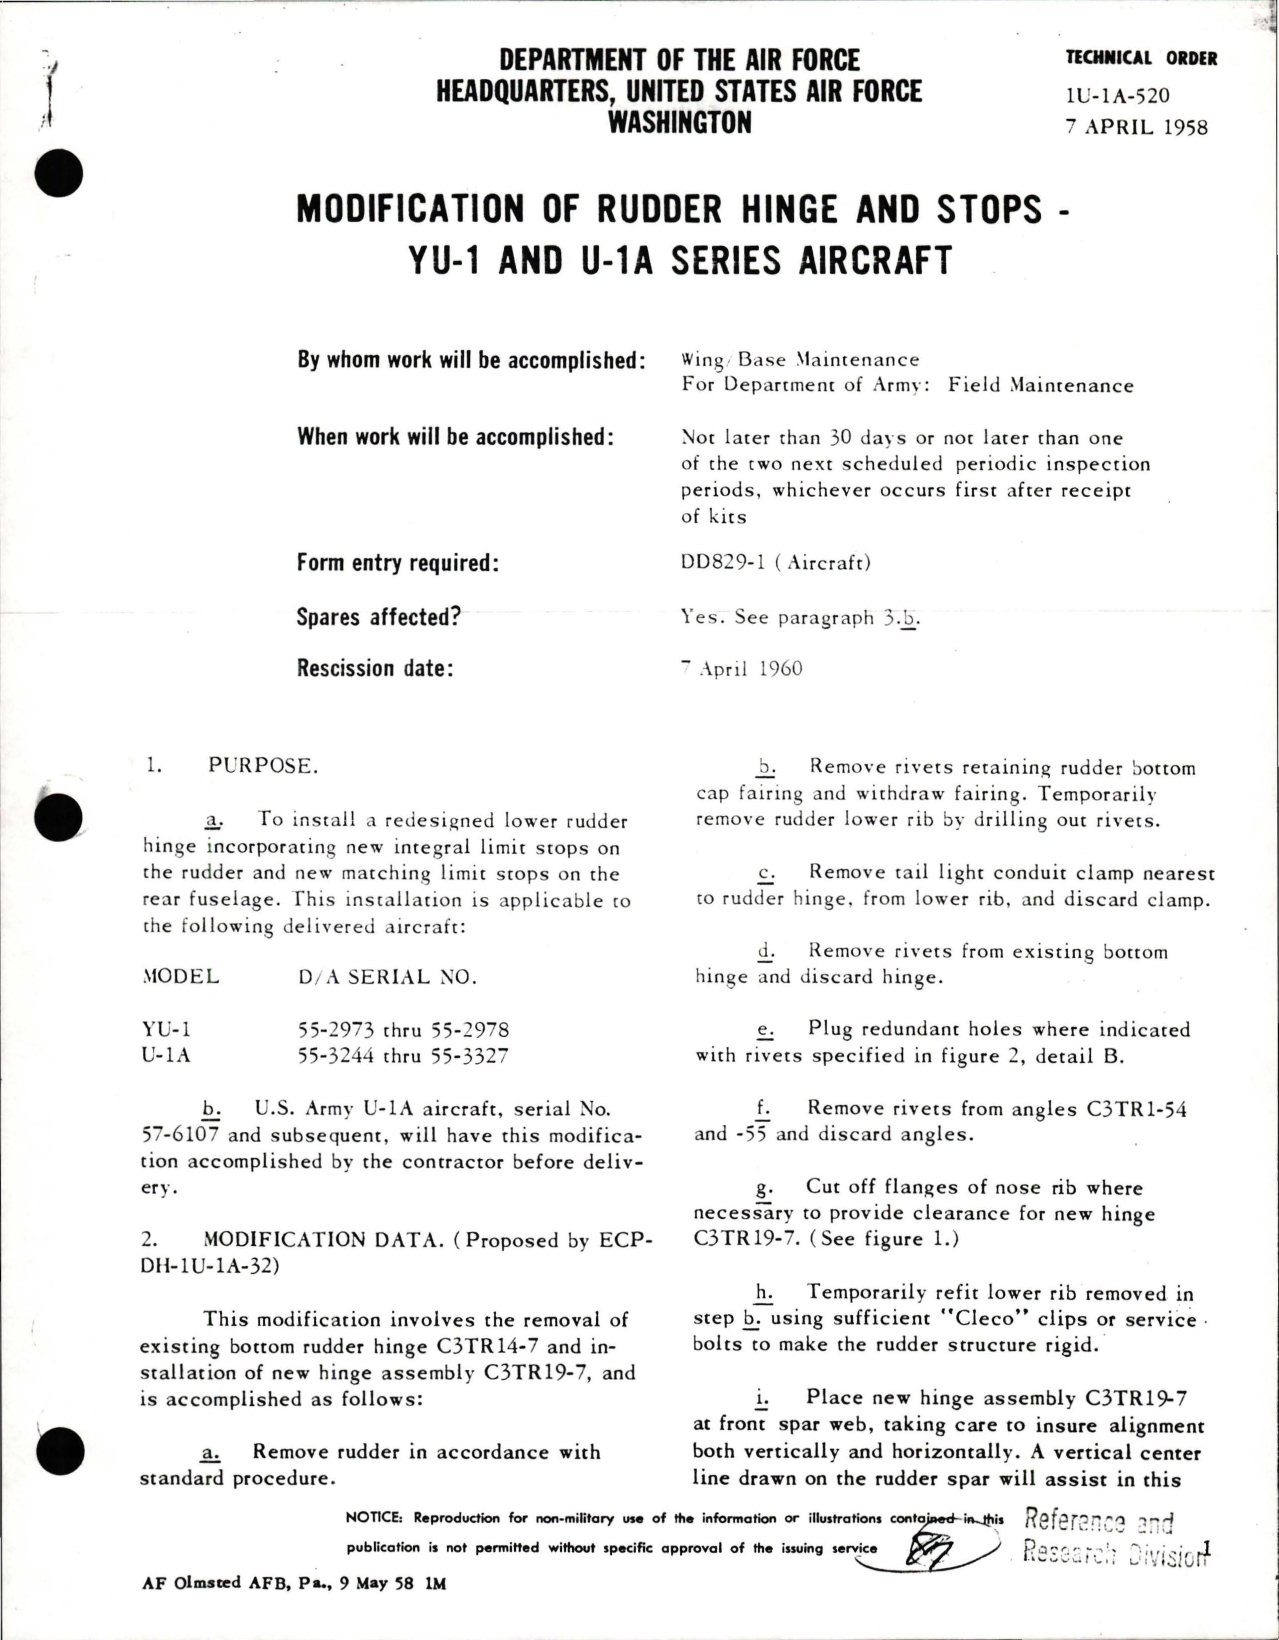 Sample page 1 from AirCorps Library document: Modification of Rudder Hinge & Stops on YU-1 and U-1A